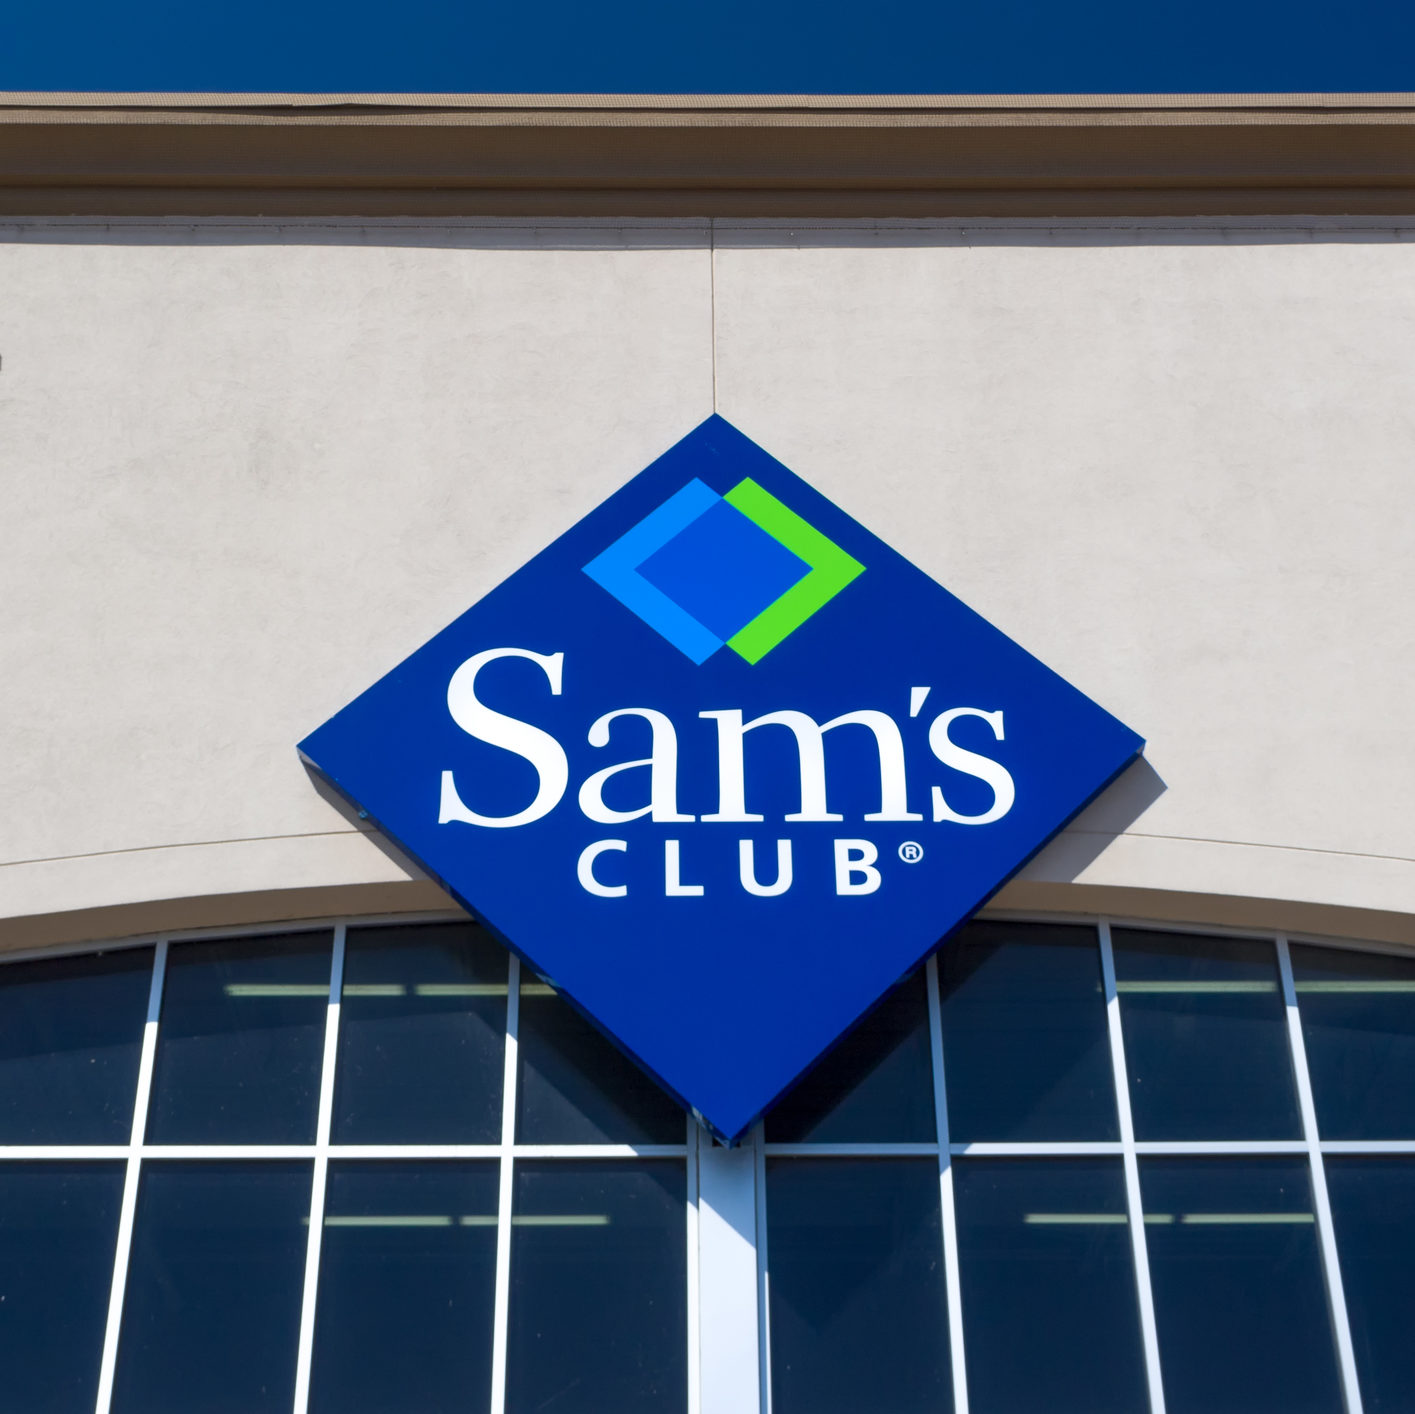 Sam's Club Reveals Exciting New Growth Plans